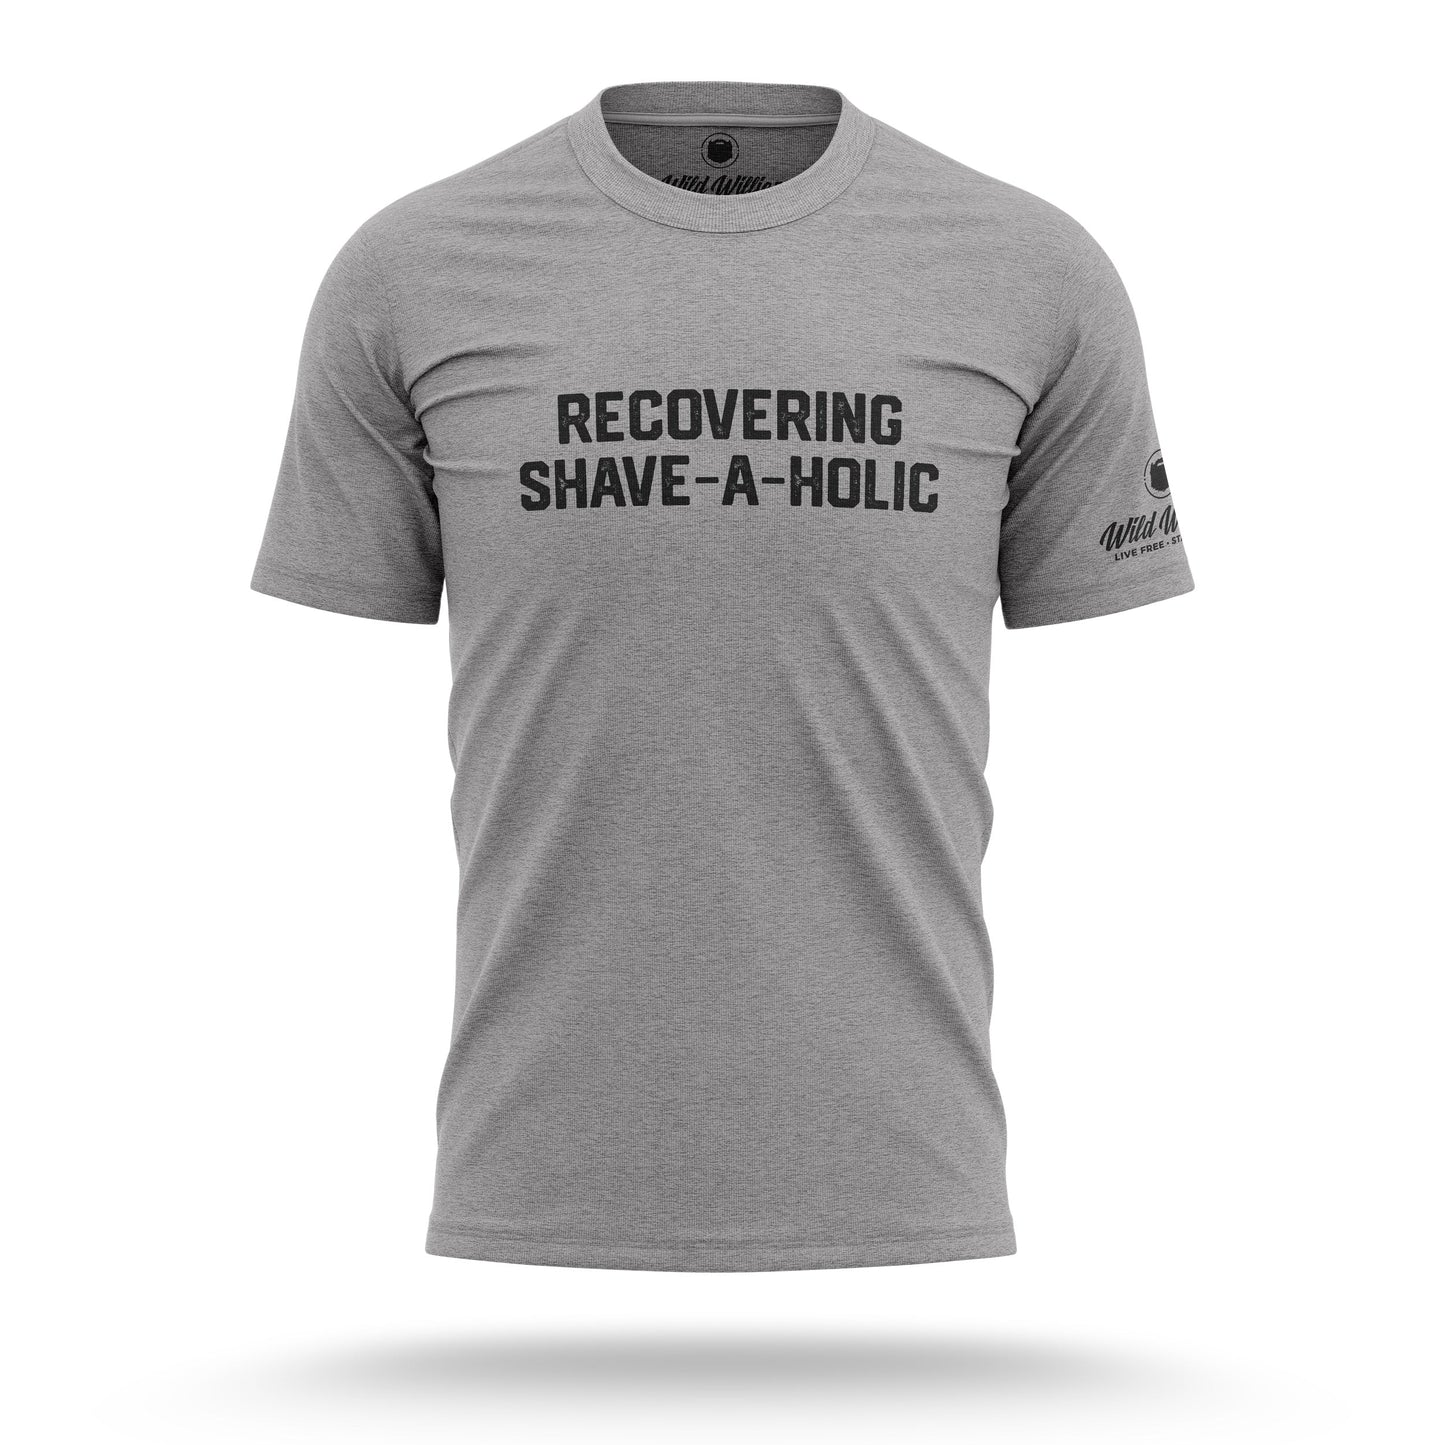 Recovering Shave-A-Holic T-Shirt T-Shirt Wild-Willies S Gray 